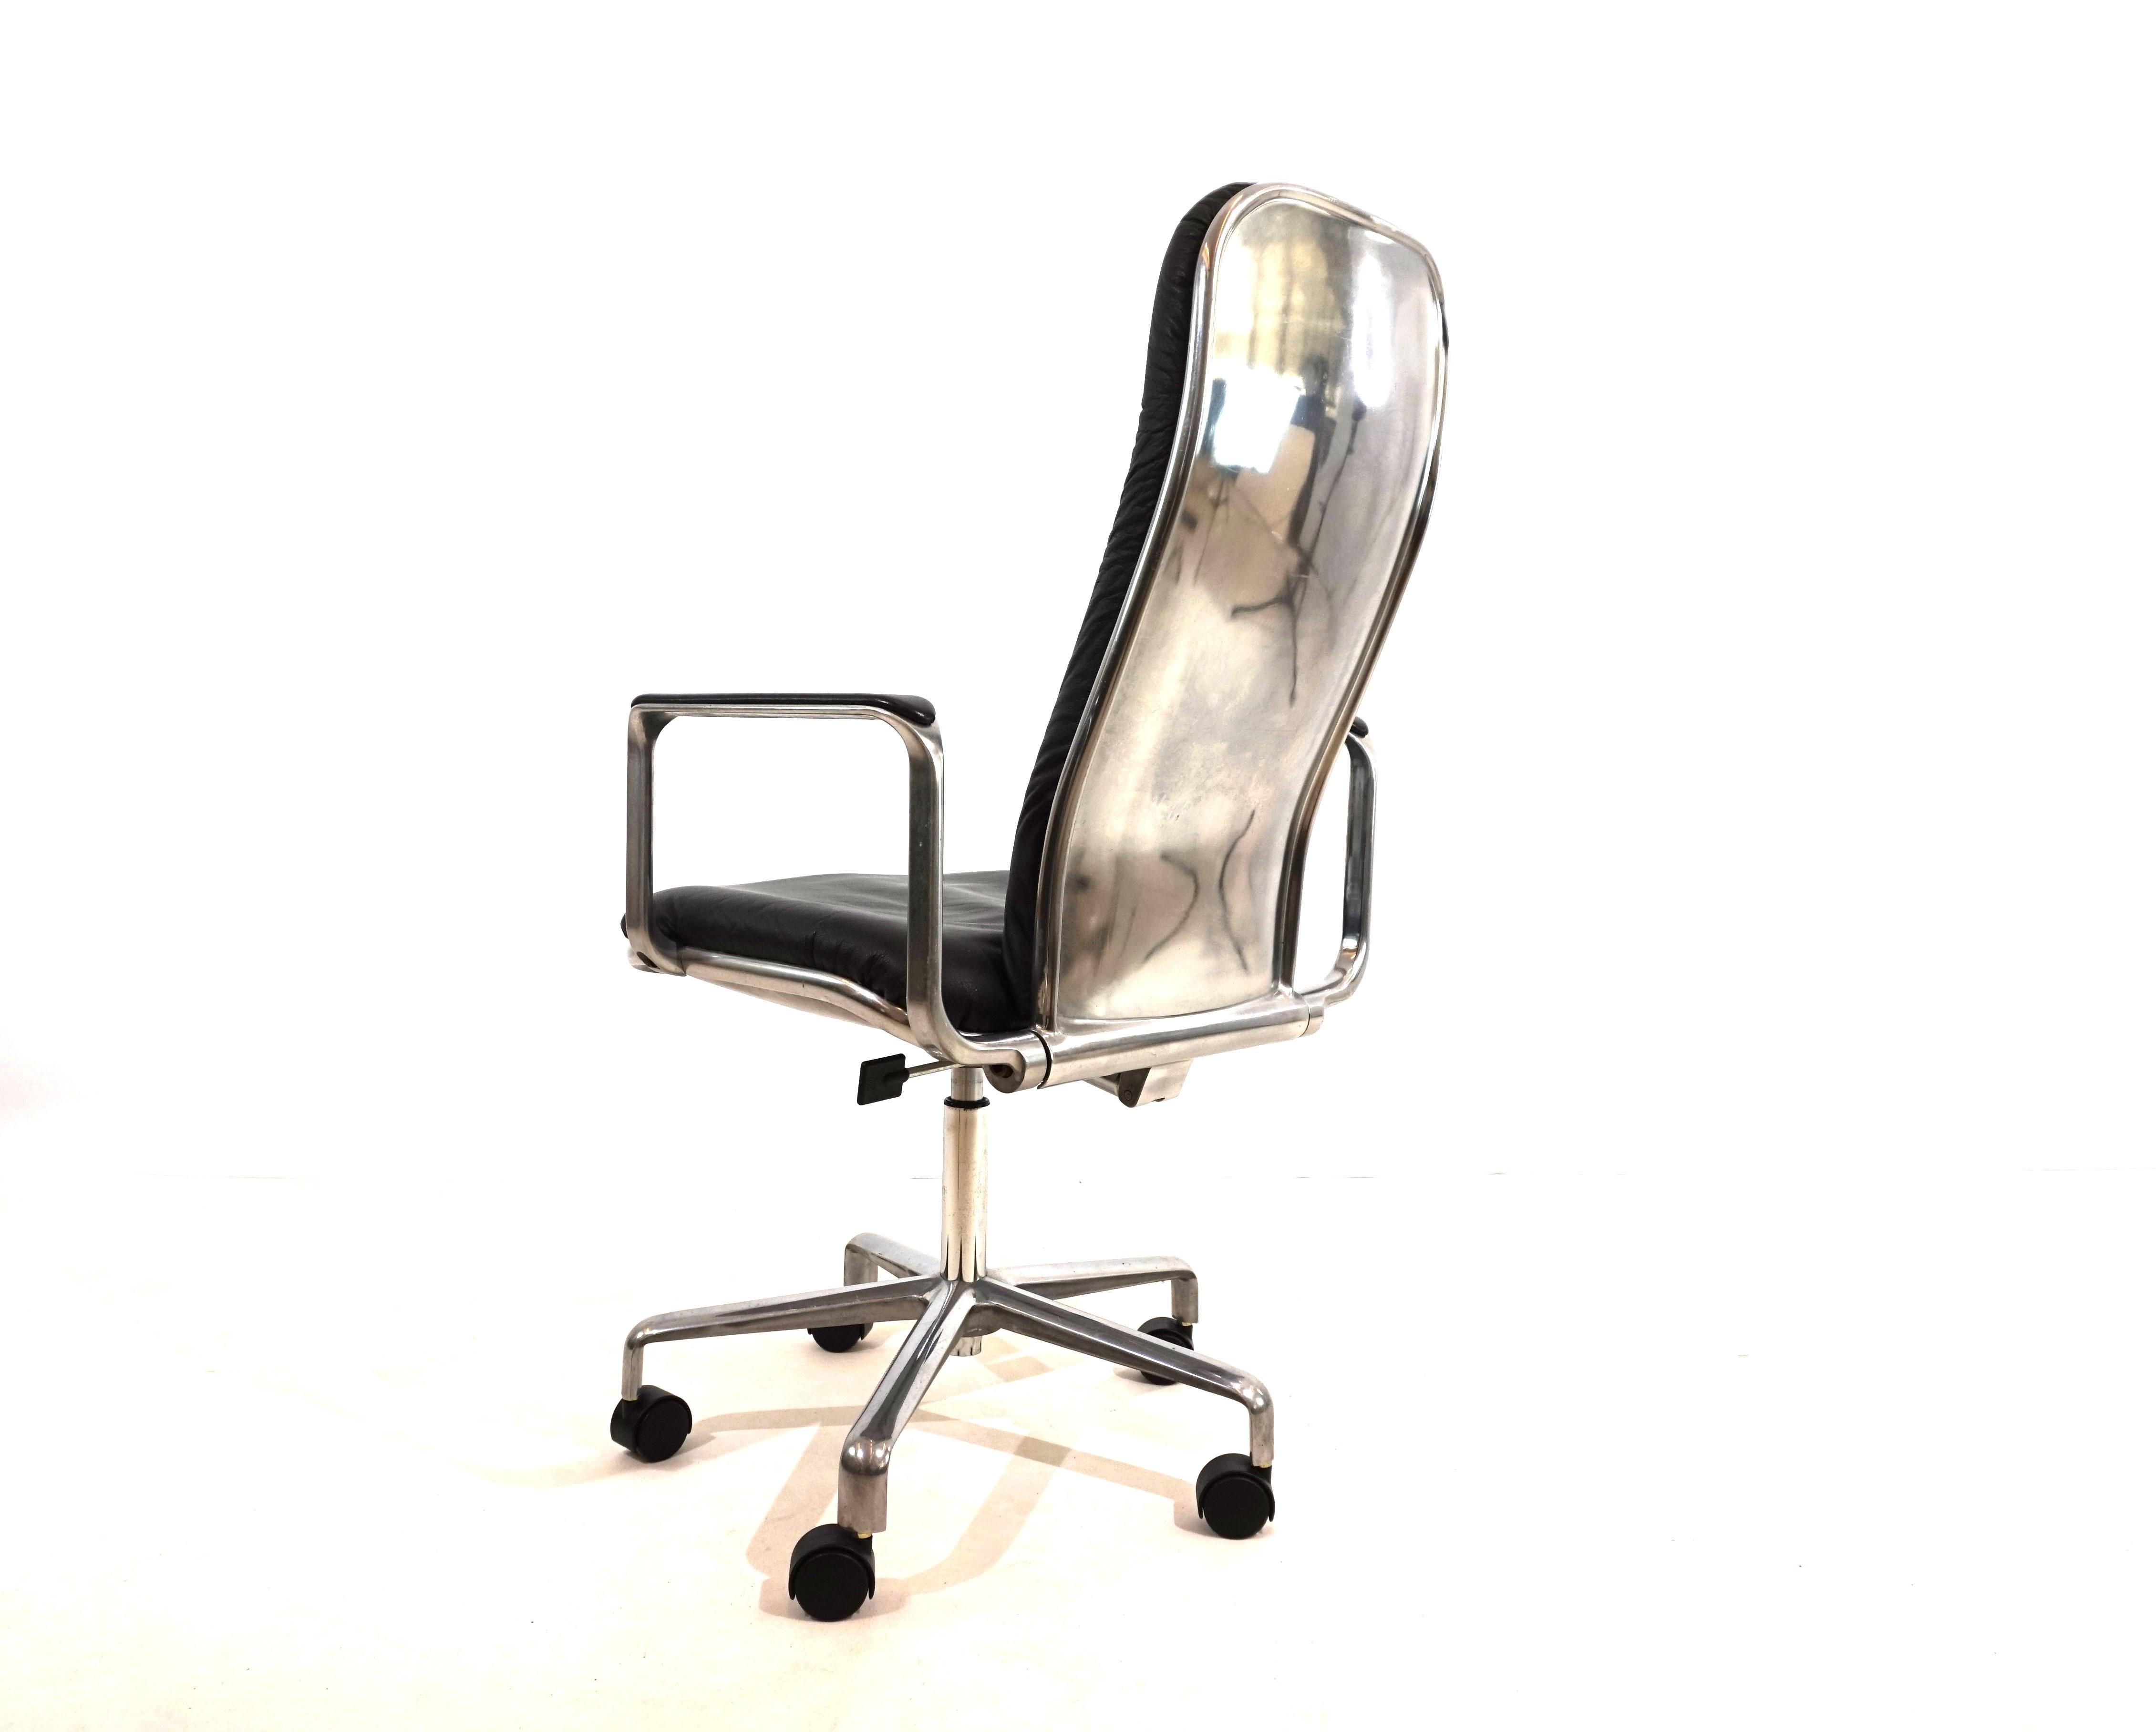 This always-attractive Supporto office chair is in very good condition and comes in the most beautiful combination of black leather/polished aluminum frame. The black leather pads on the backrest and seat are flawless, the polished aluminum surfaces